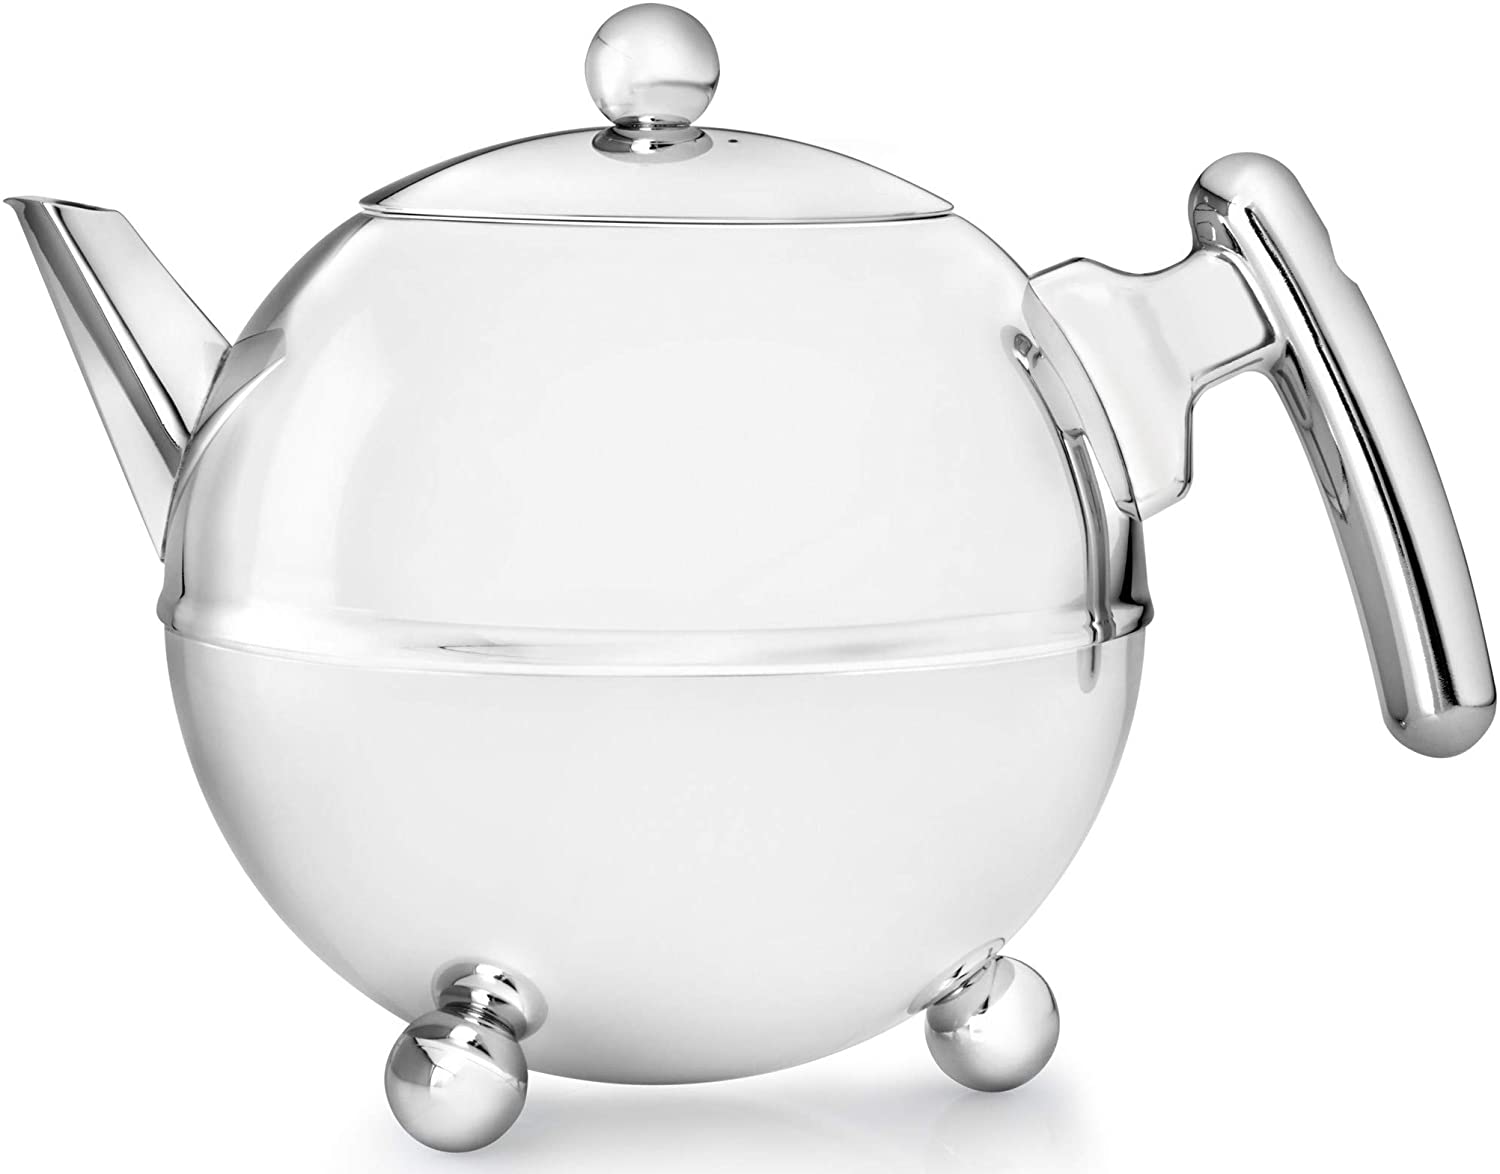 Bredemeijer 1.2 L Stainless Steel Teapot Bella Ronde with Chromium Fittings, Silver